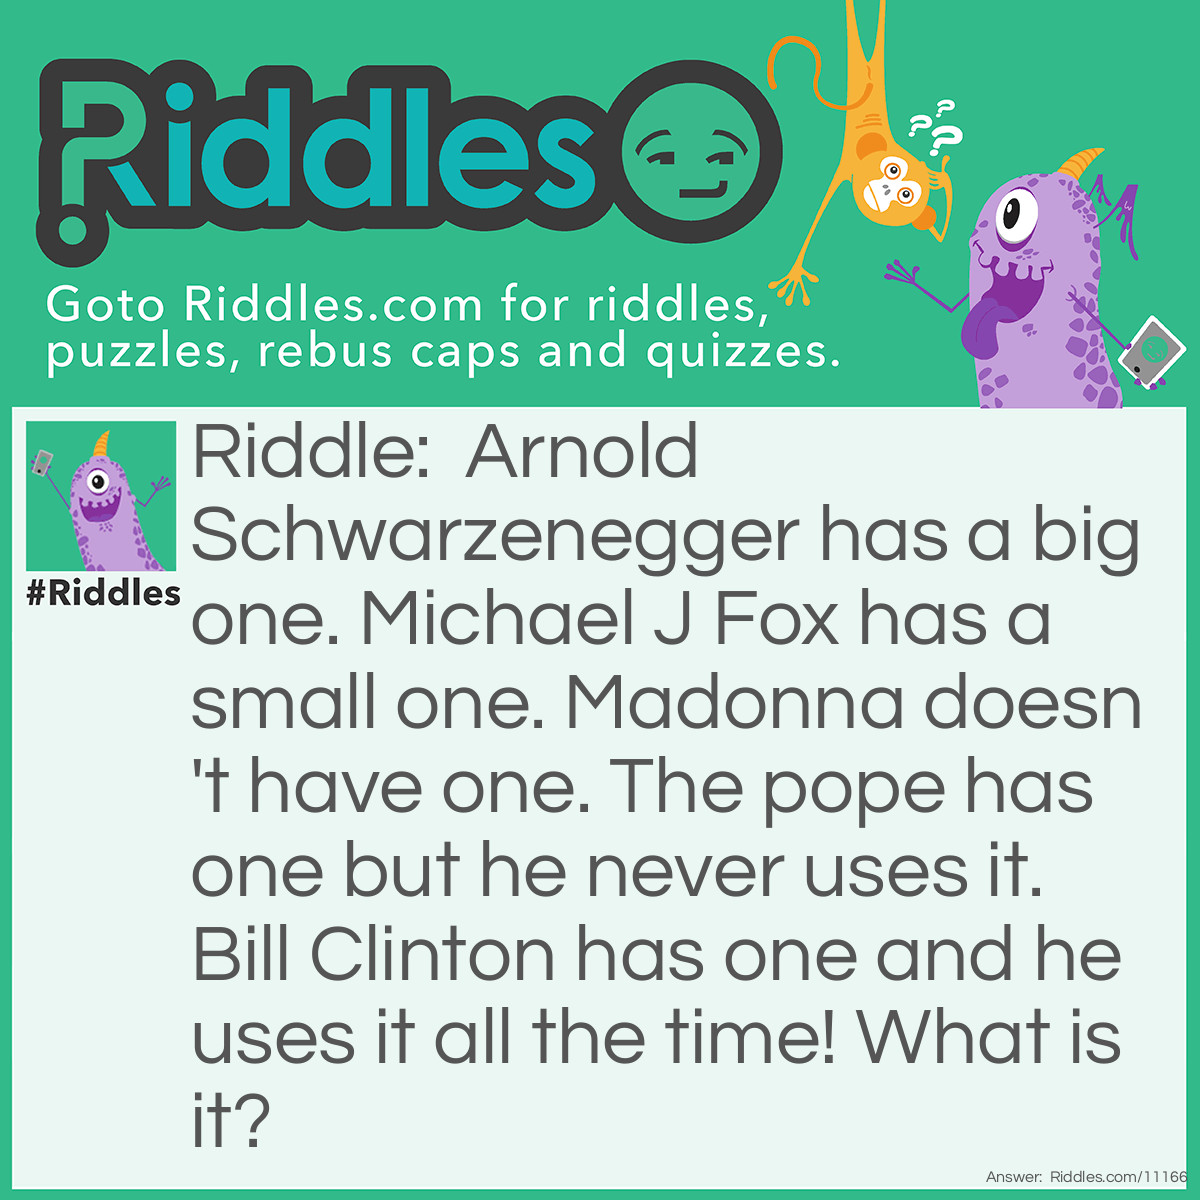 Riddle: Arnold Schwarzenegger has a big one. Michael J Fox has a small one. Madonna doesn't have one. The pope has one but he never uses it. Bill Clinton has one and he uses it all the time! What is it? Answer: A surname.